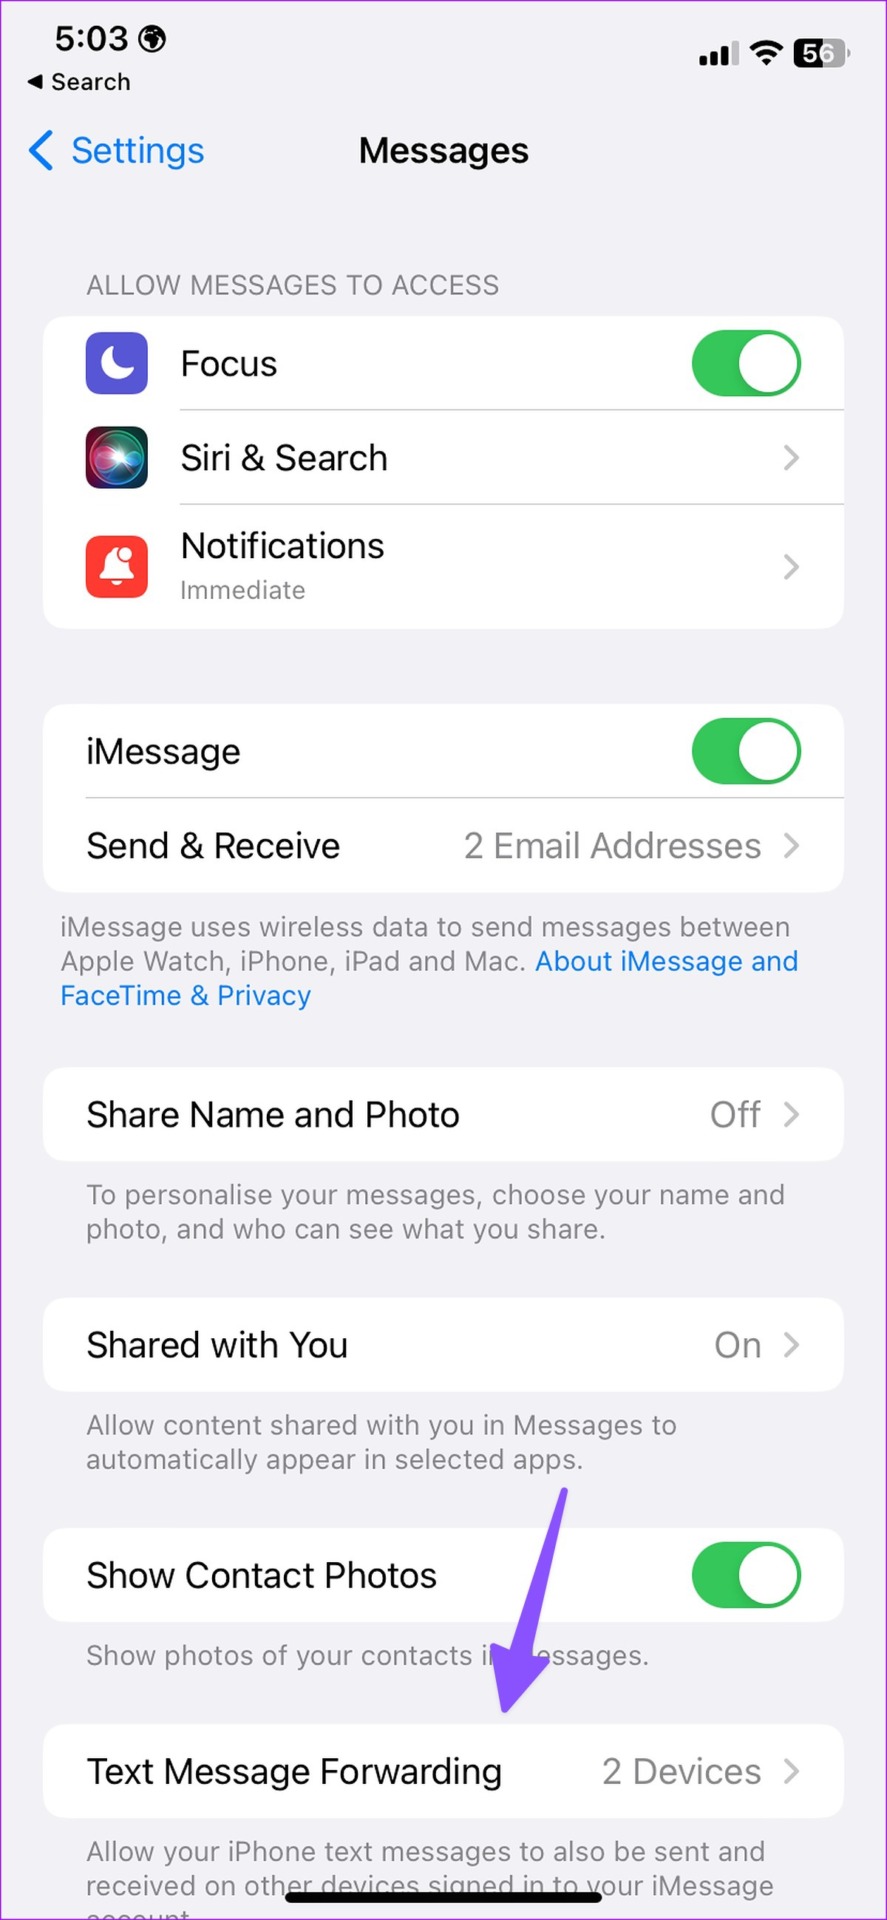 tex message forwarding on iPhone